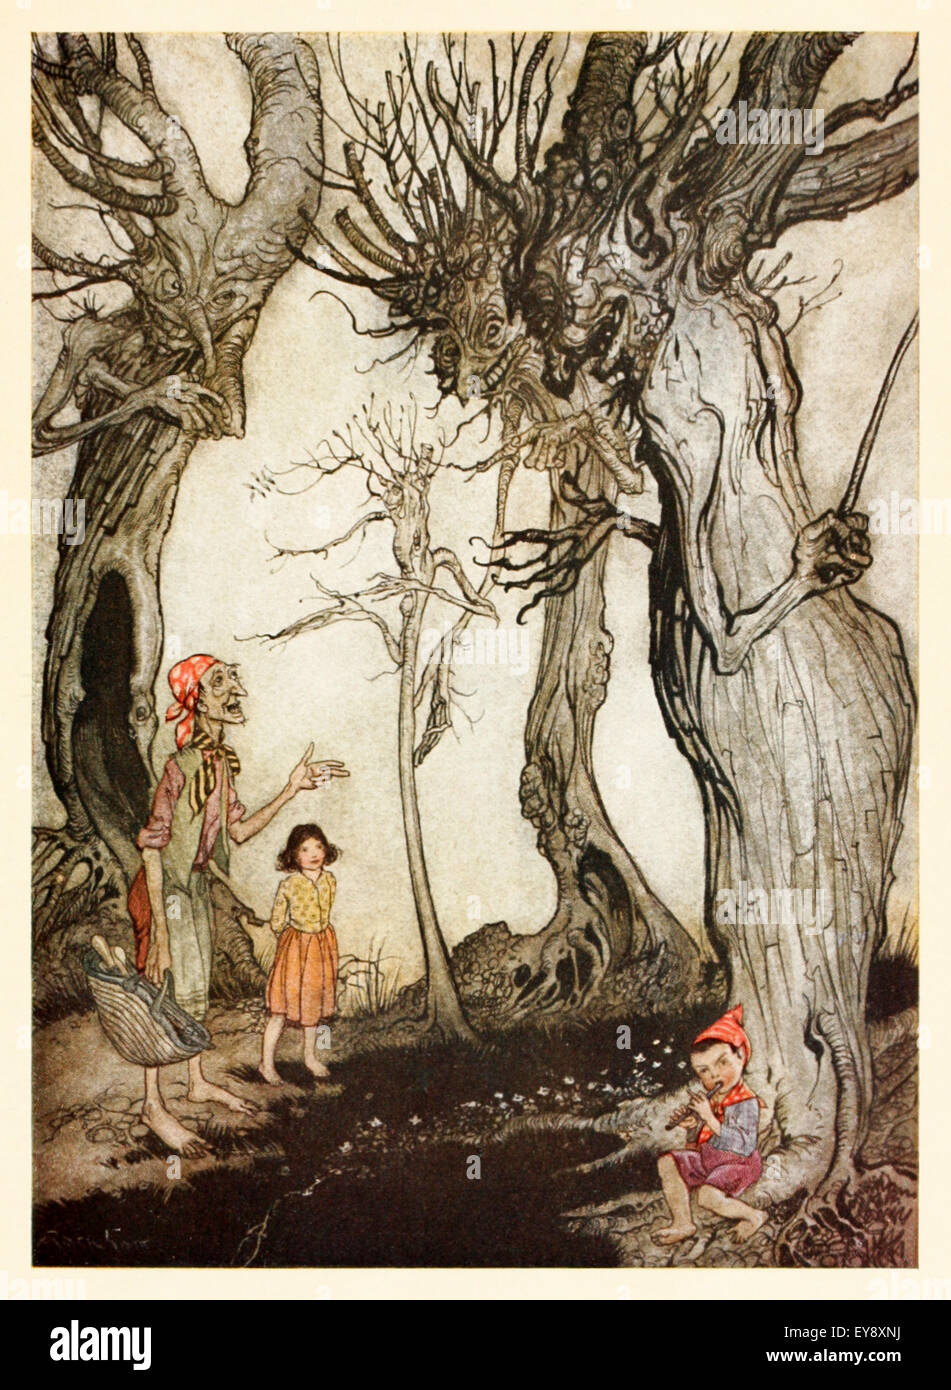 'The Trees and the Axe' fable by Aesop (circa 600BC). The trees willingly give a woodsman a sapling to fashion a handle for his axe. Nothing bothers a man more than to see he has aided his own undoing. Illustration by Arthur Rackham (1867-1939). See description for more information. Stock Photo